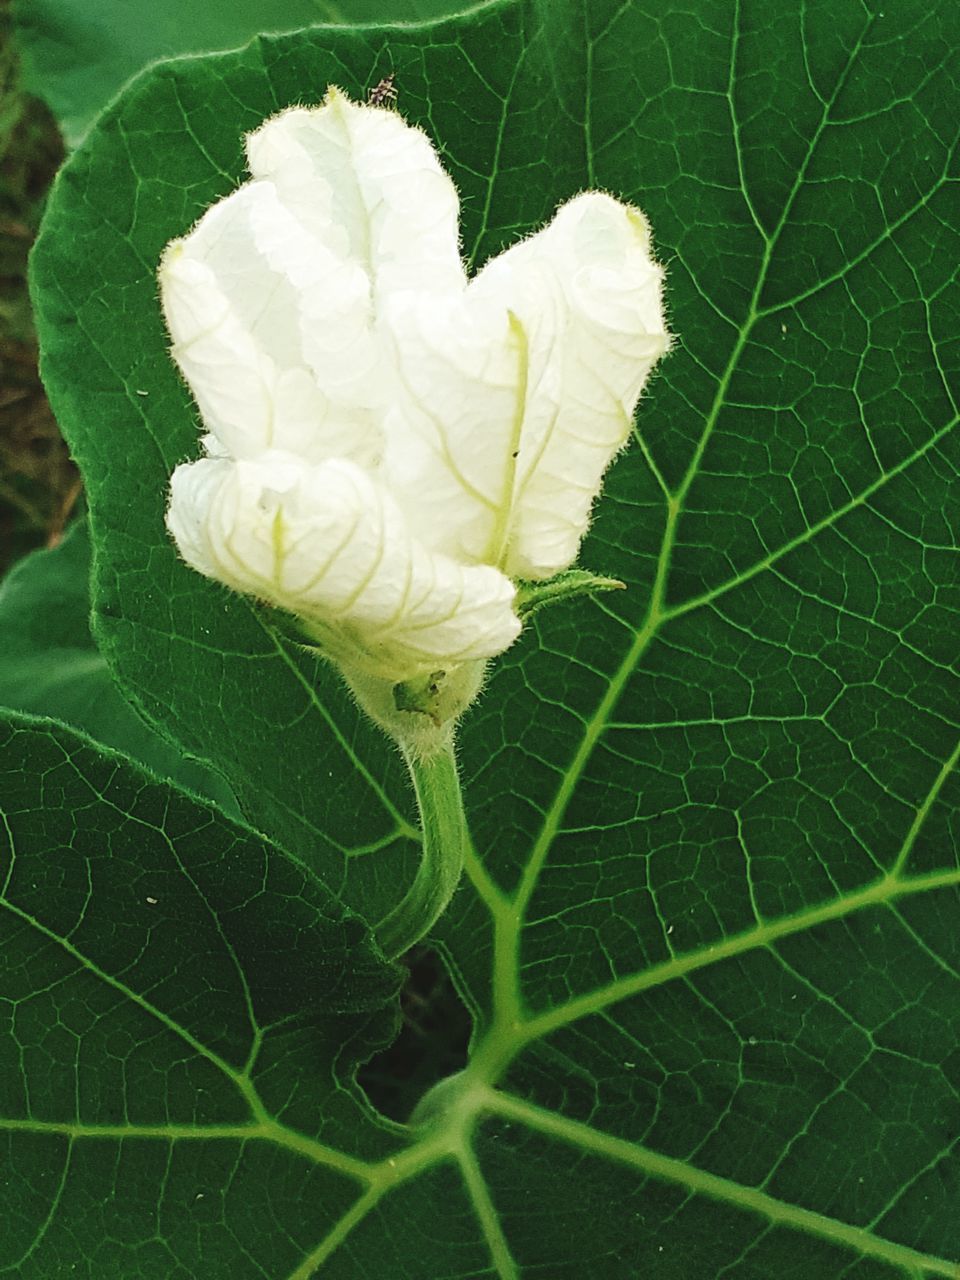 CLOSE-UP OF WHITE FLOWER ON LEAF